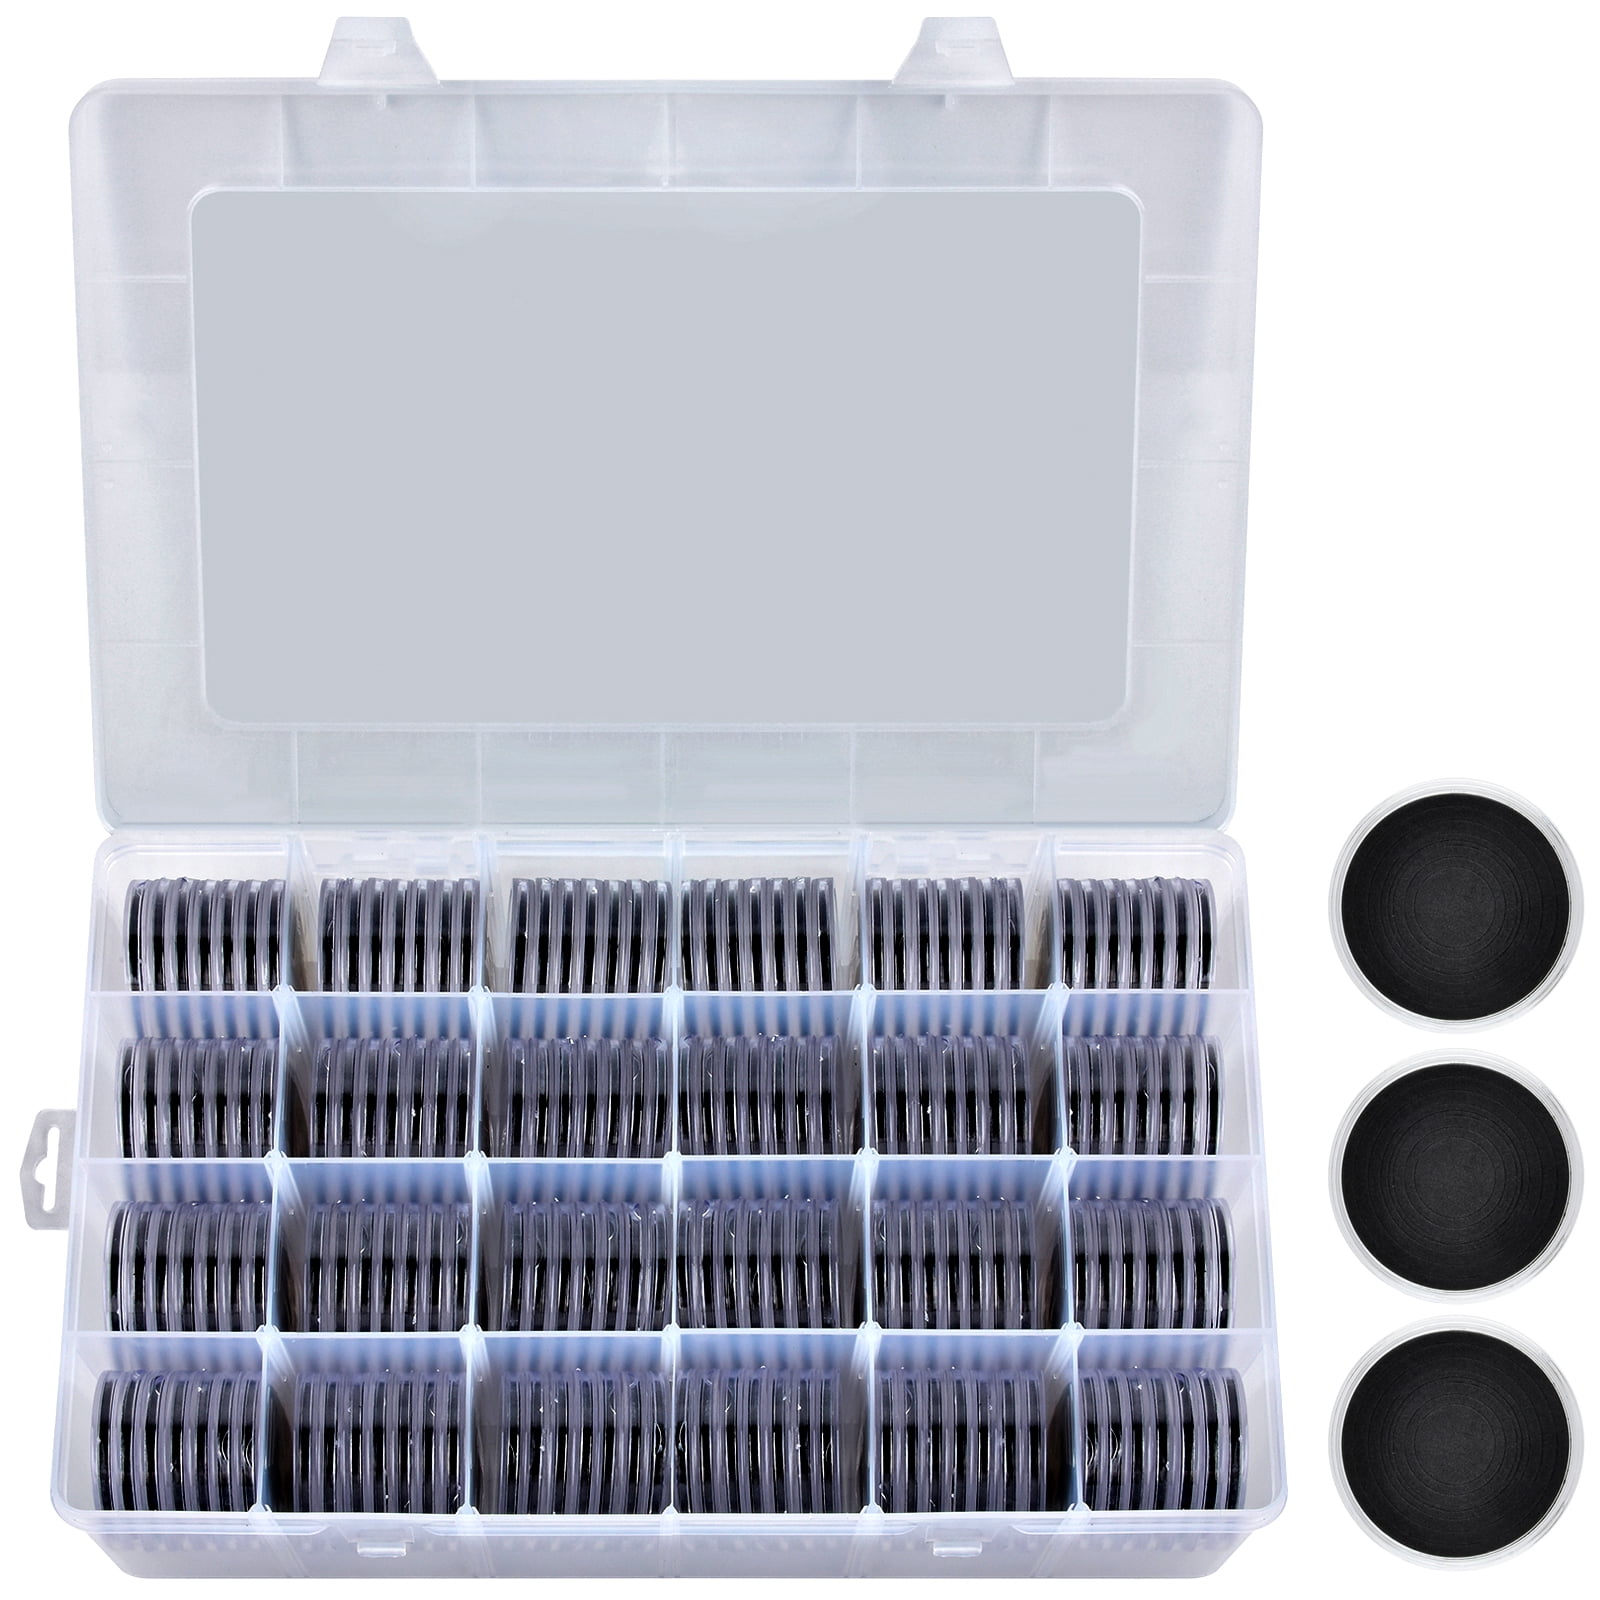 Fullcase Coin Collection Supplies Holders for Collectors, 84 Pieces 46mm Coins Capsules with Foam Gasket and Plastic Storage Organizer Box, 6 Sizes